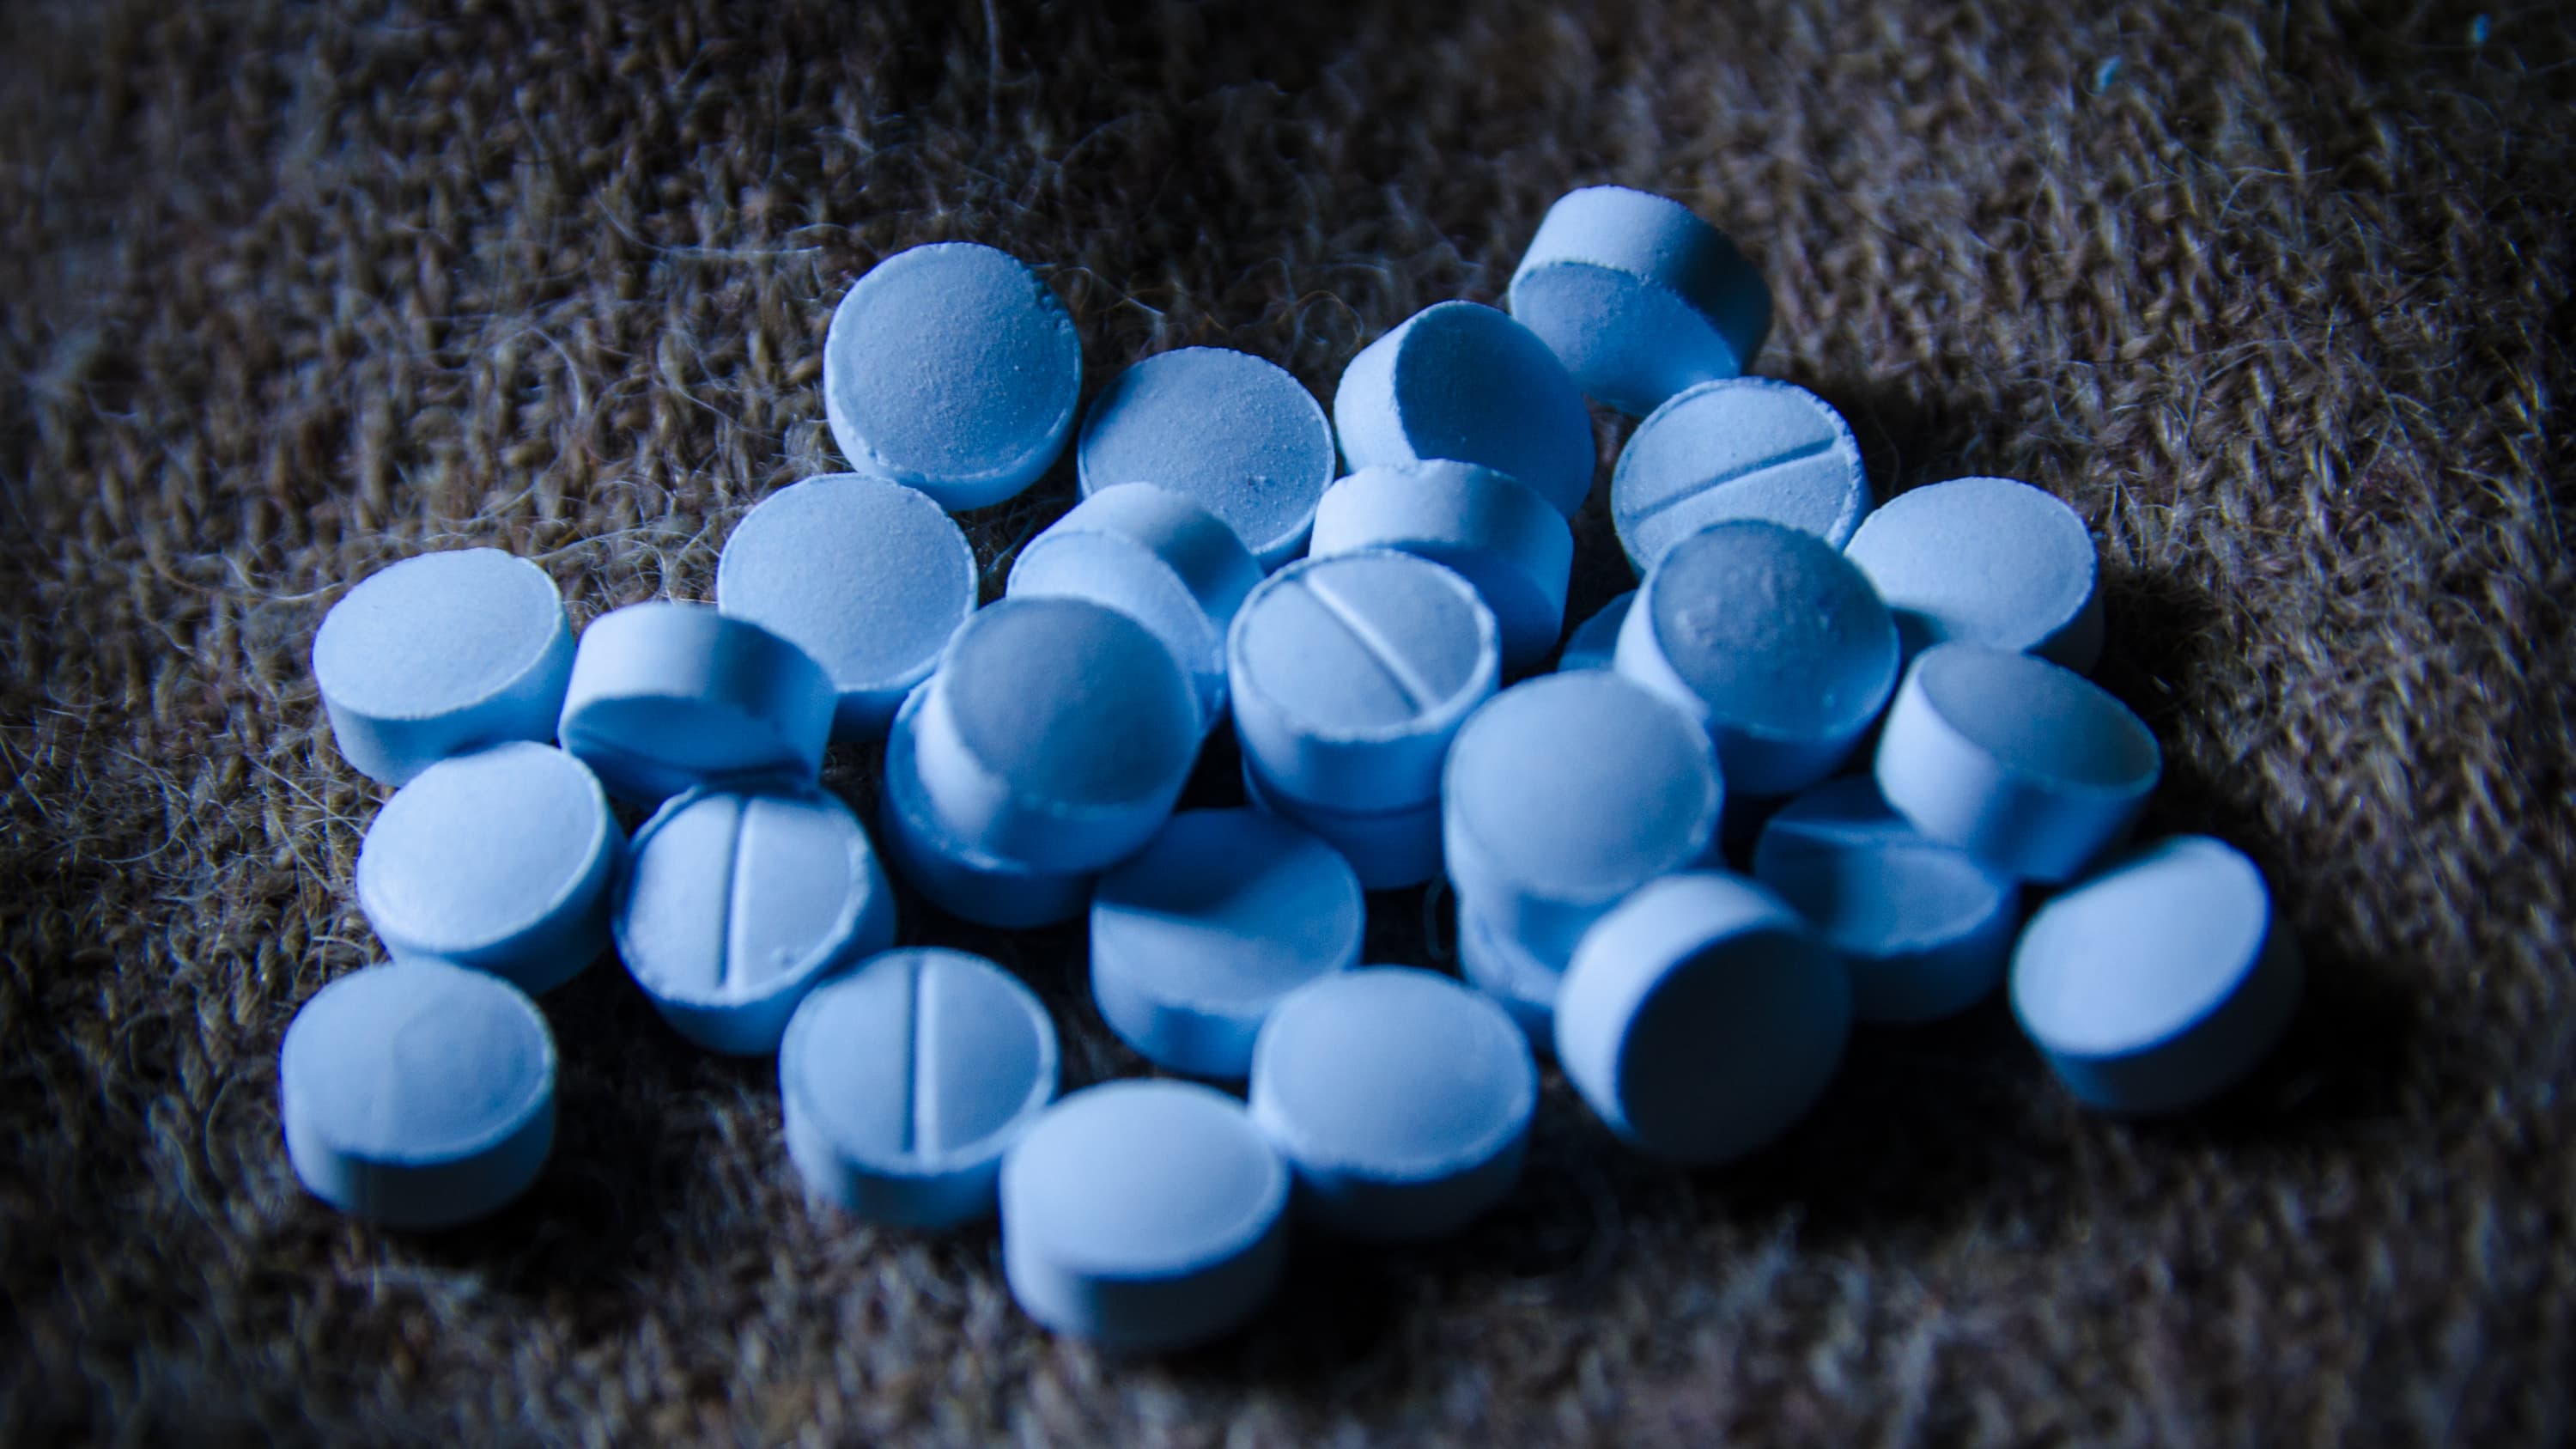 blue pills, diazepam, unknown brand, part of the growing Benzodiazepine crisis